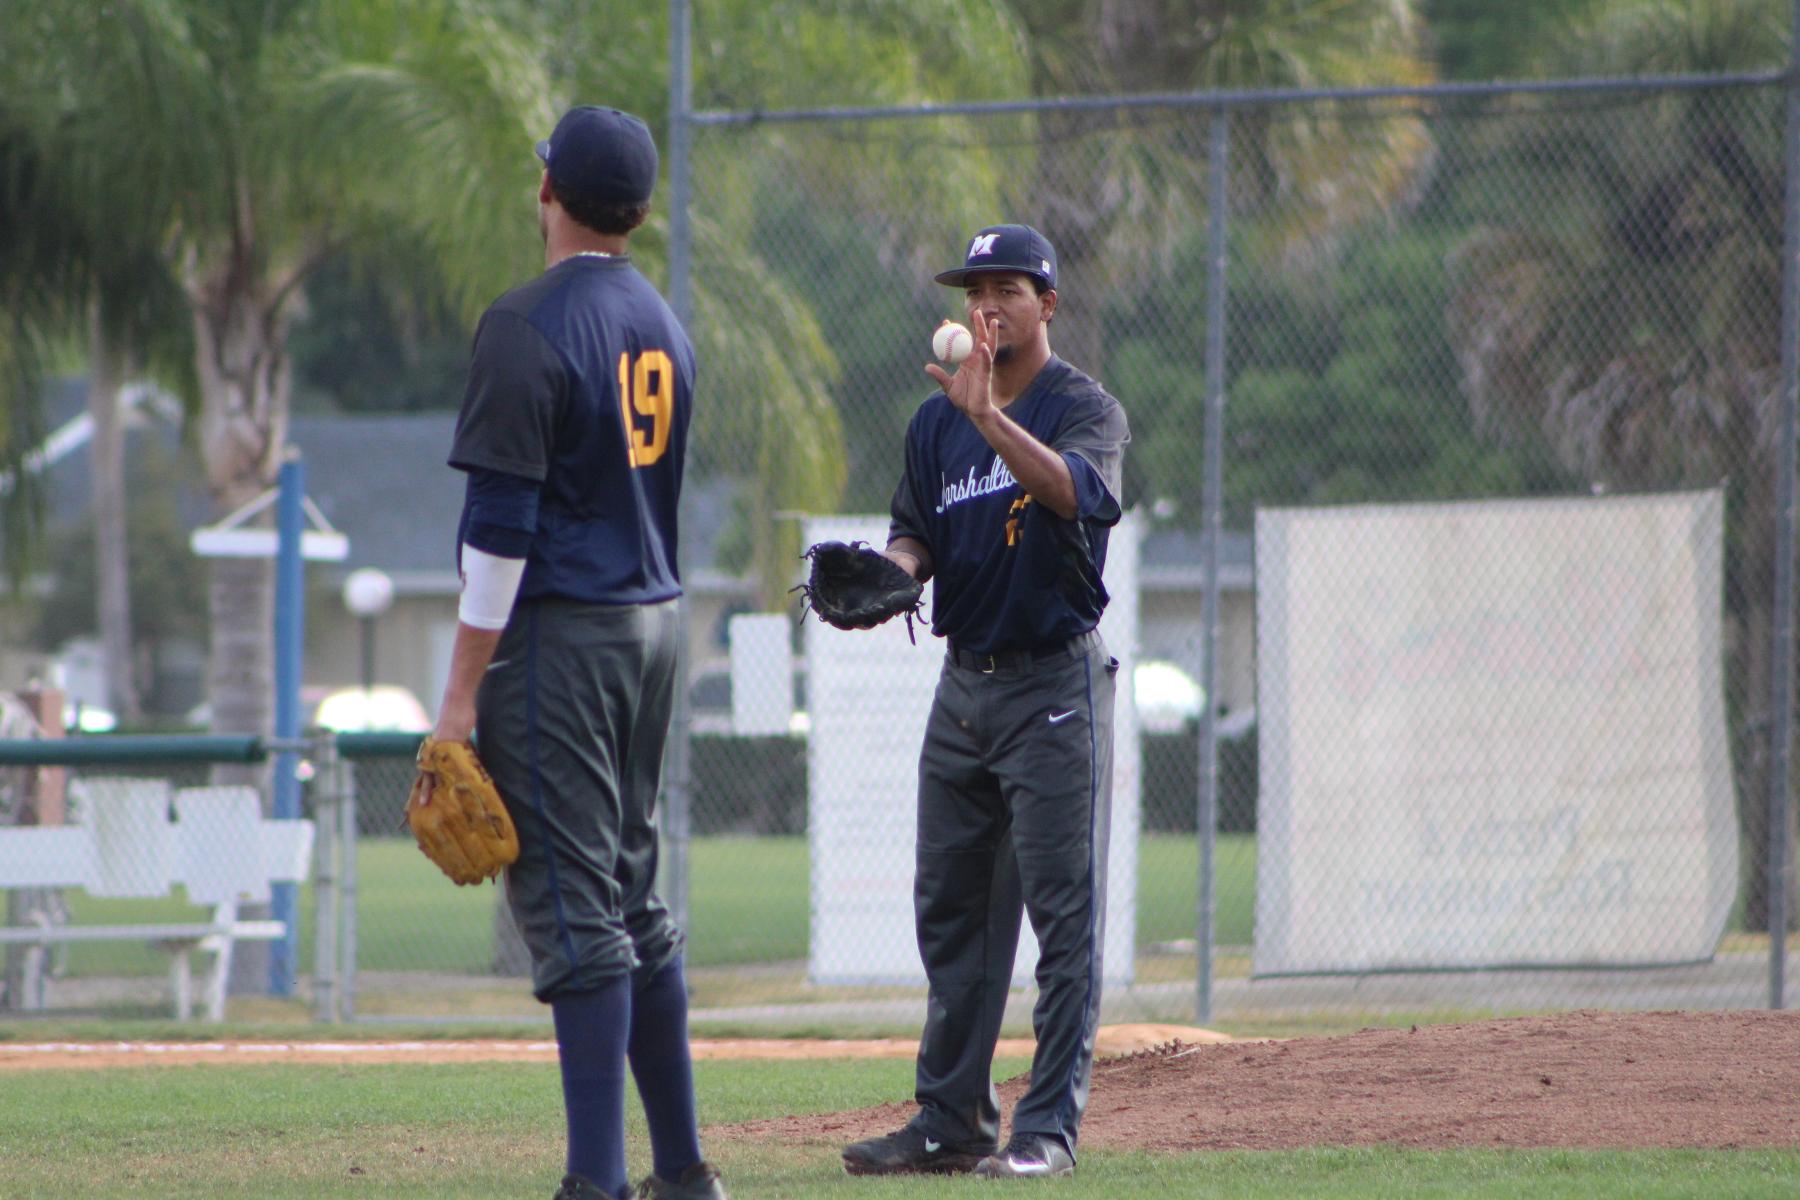 Tigers split on final day at Historic Dodgertown